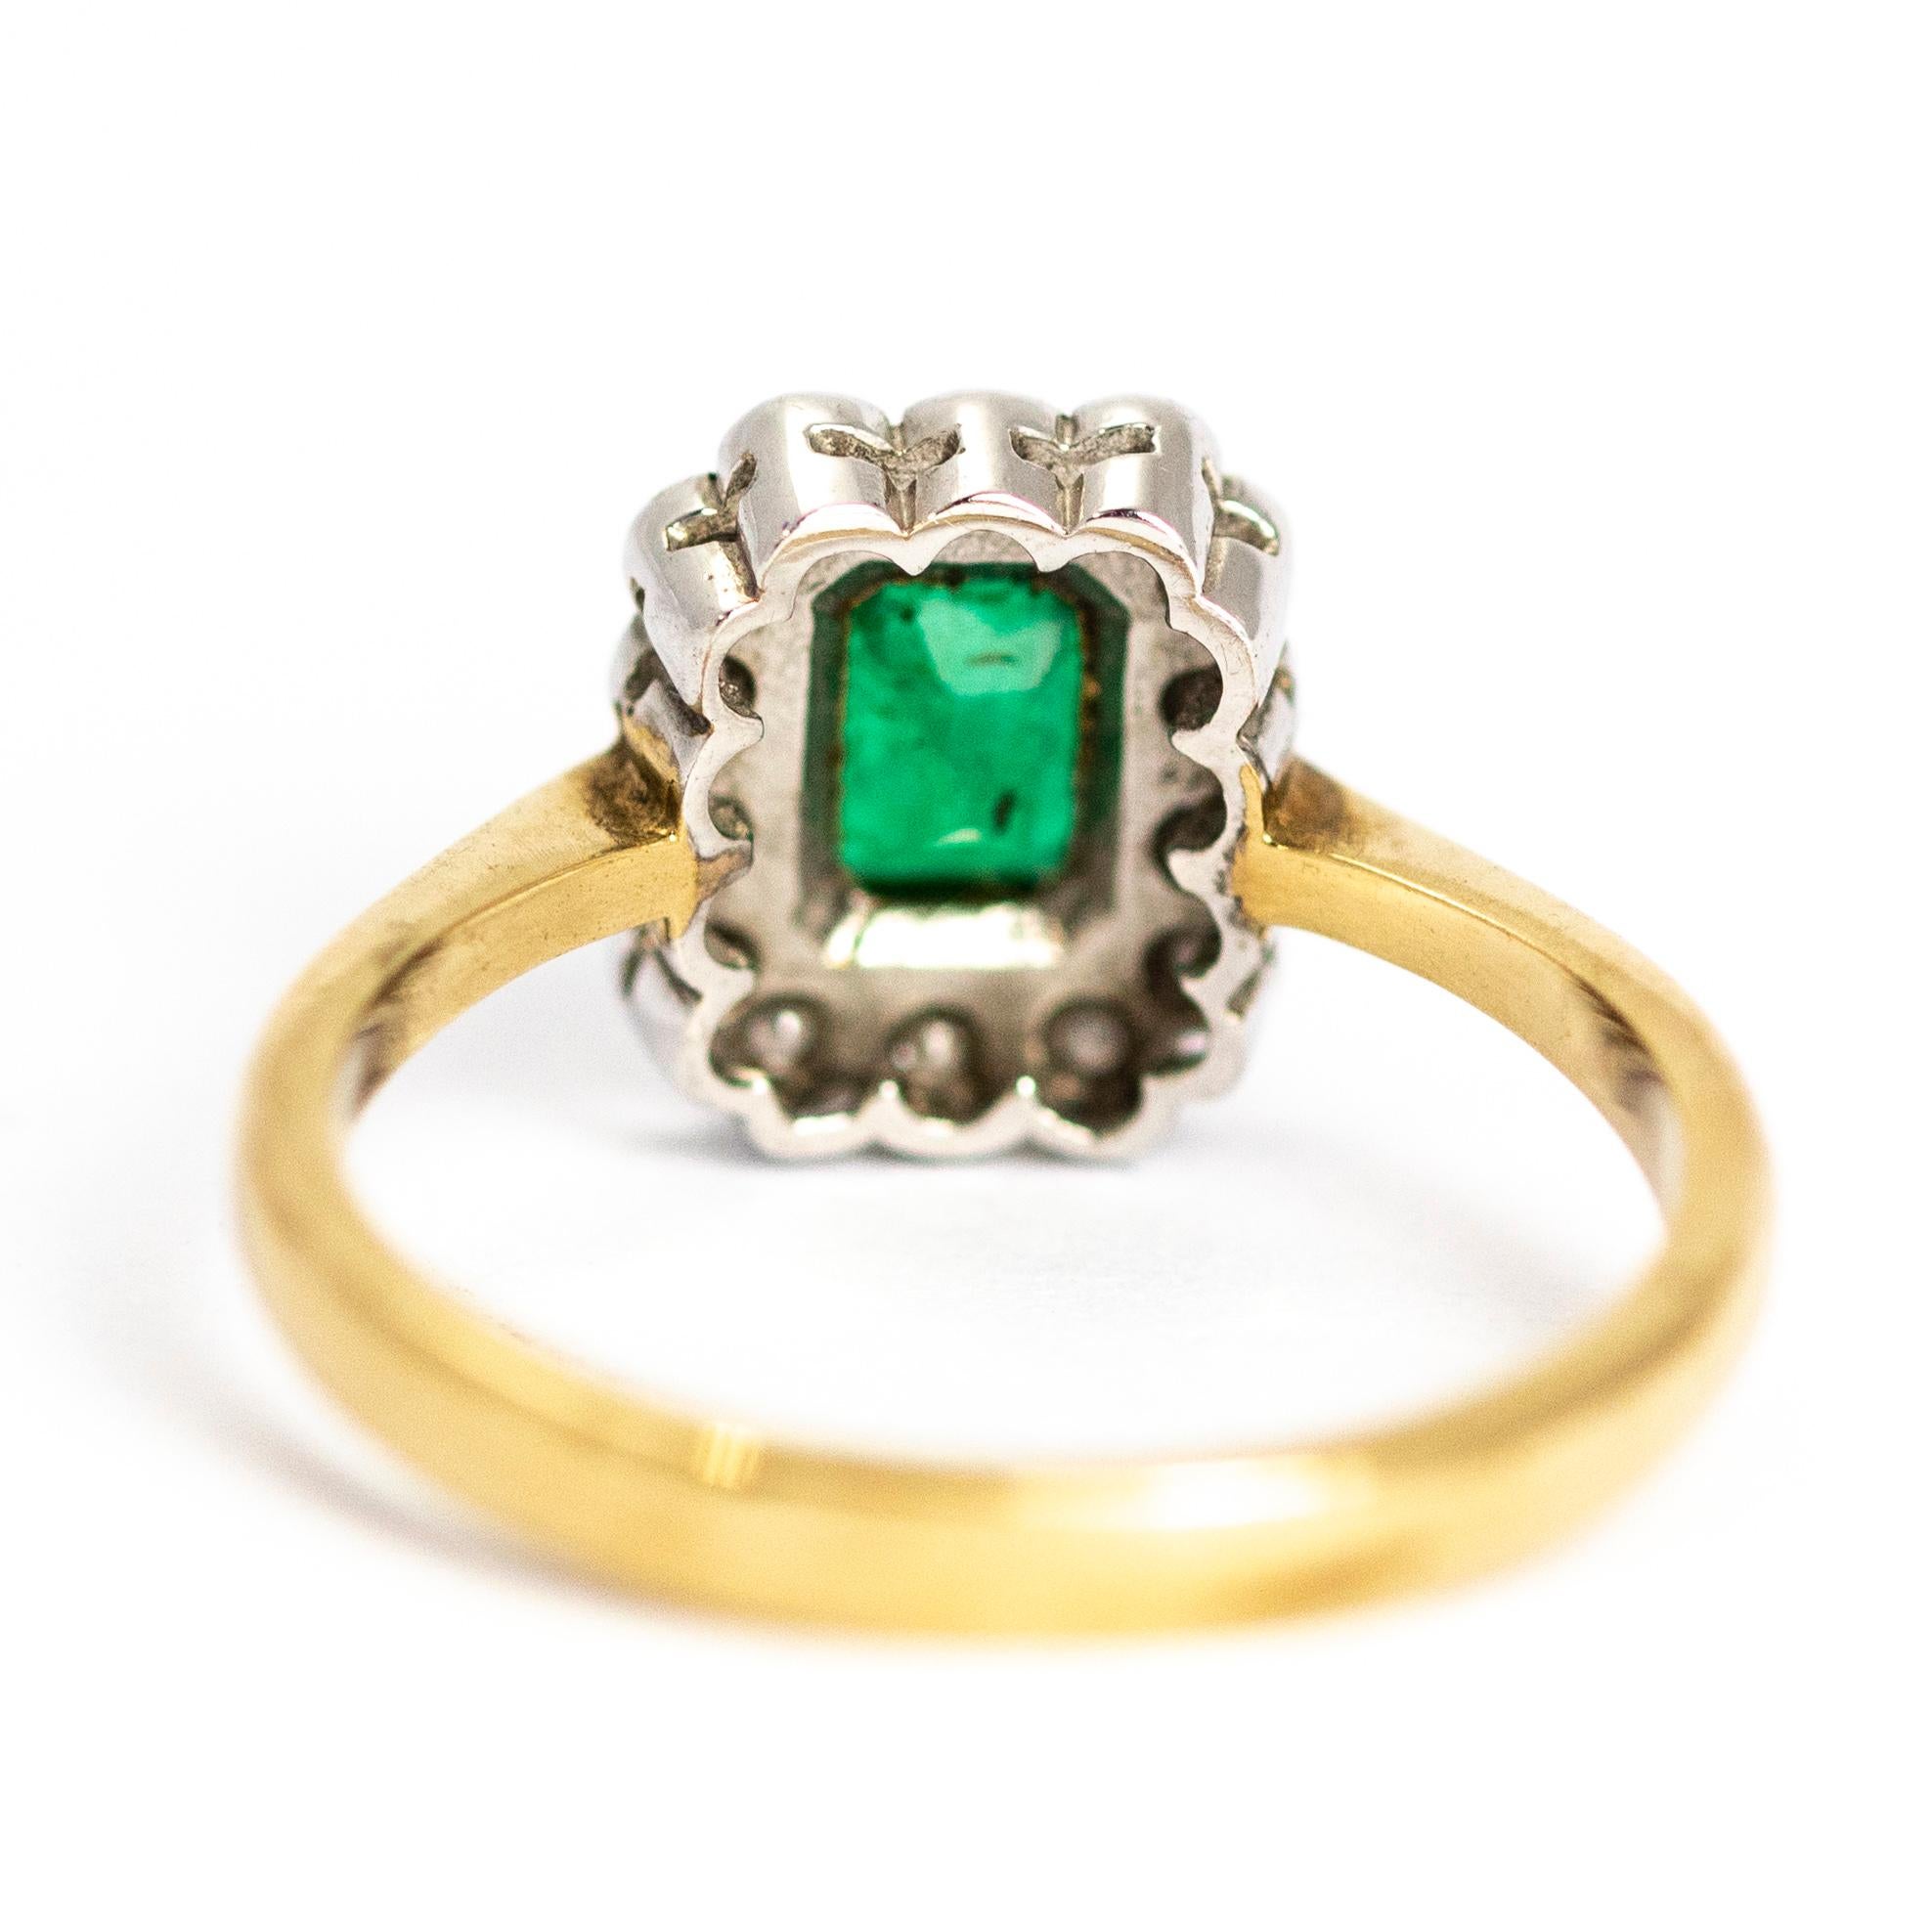 Modern Vintage Emerald and 9 Carat Gold Ring